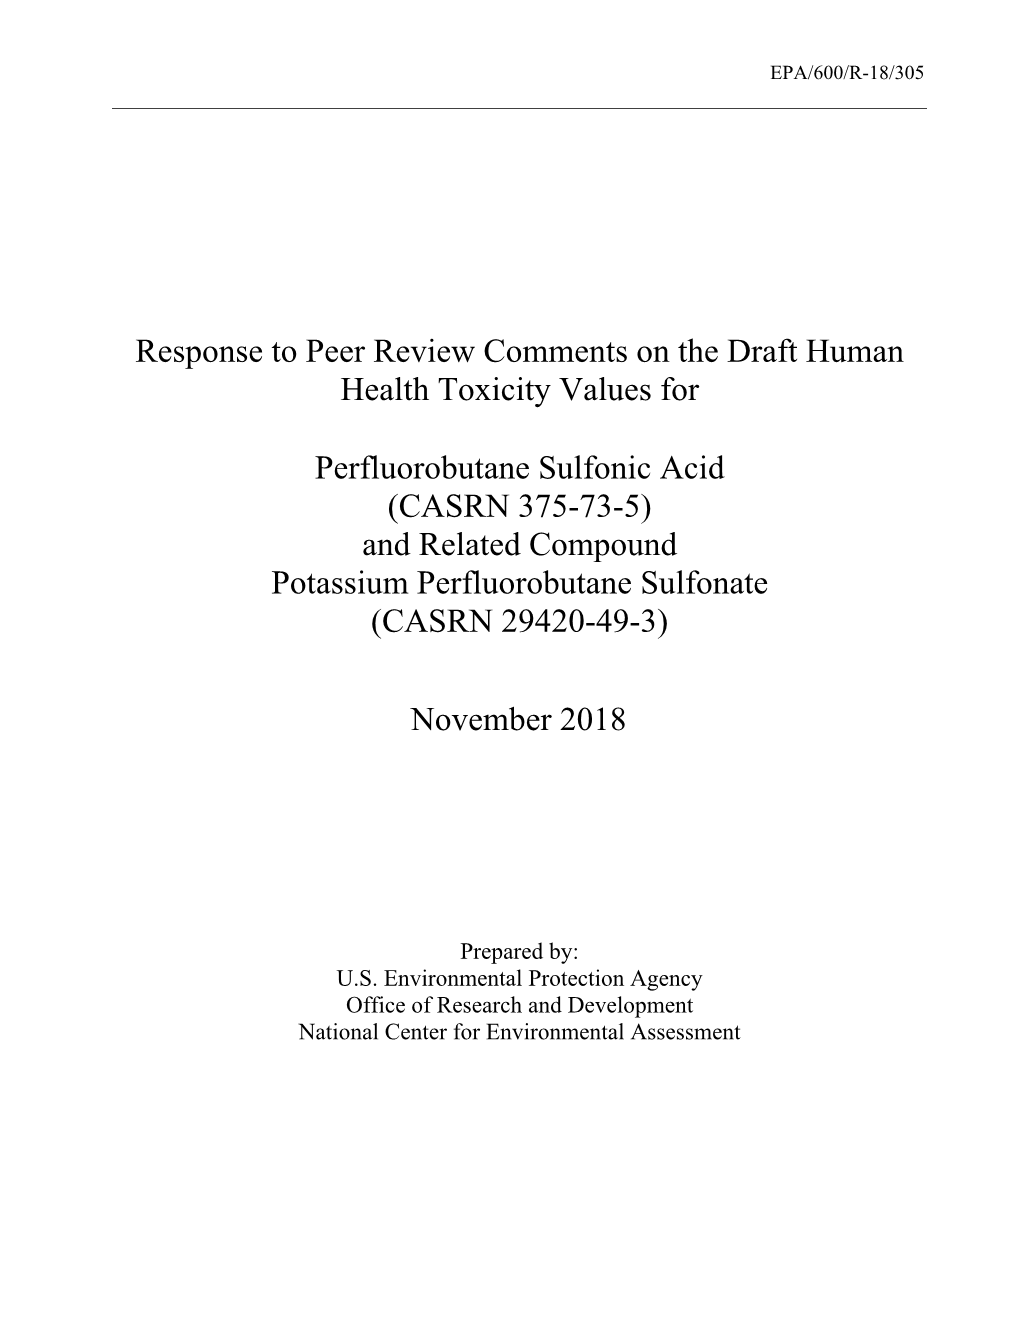 Response to Peer Review Comments on PFBS